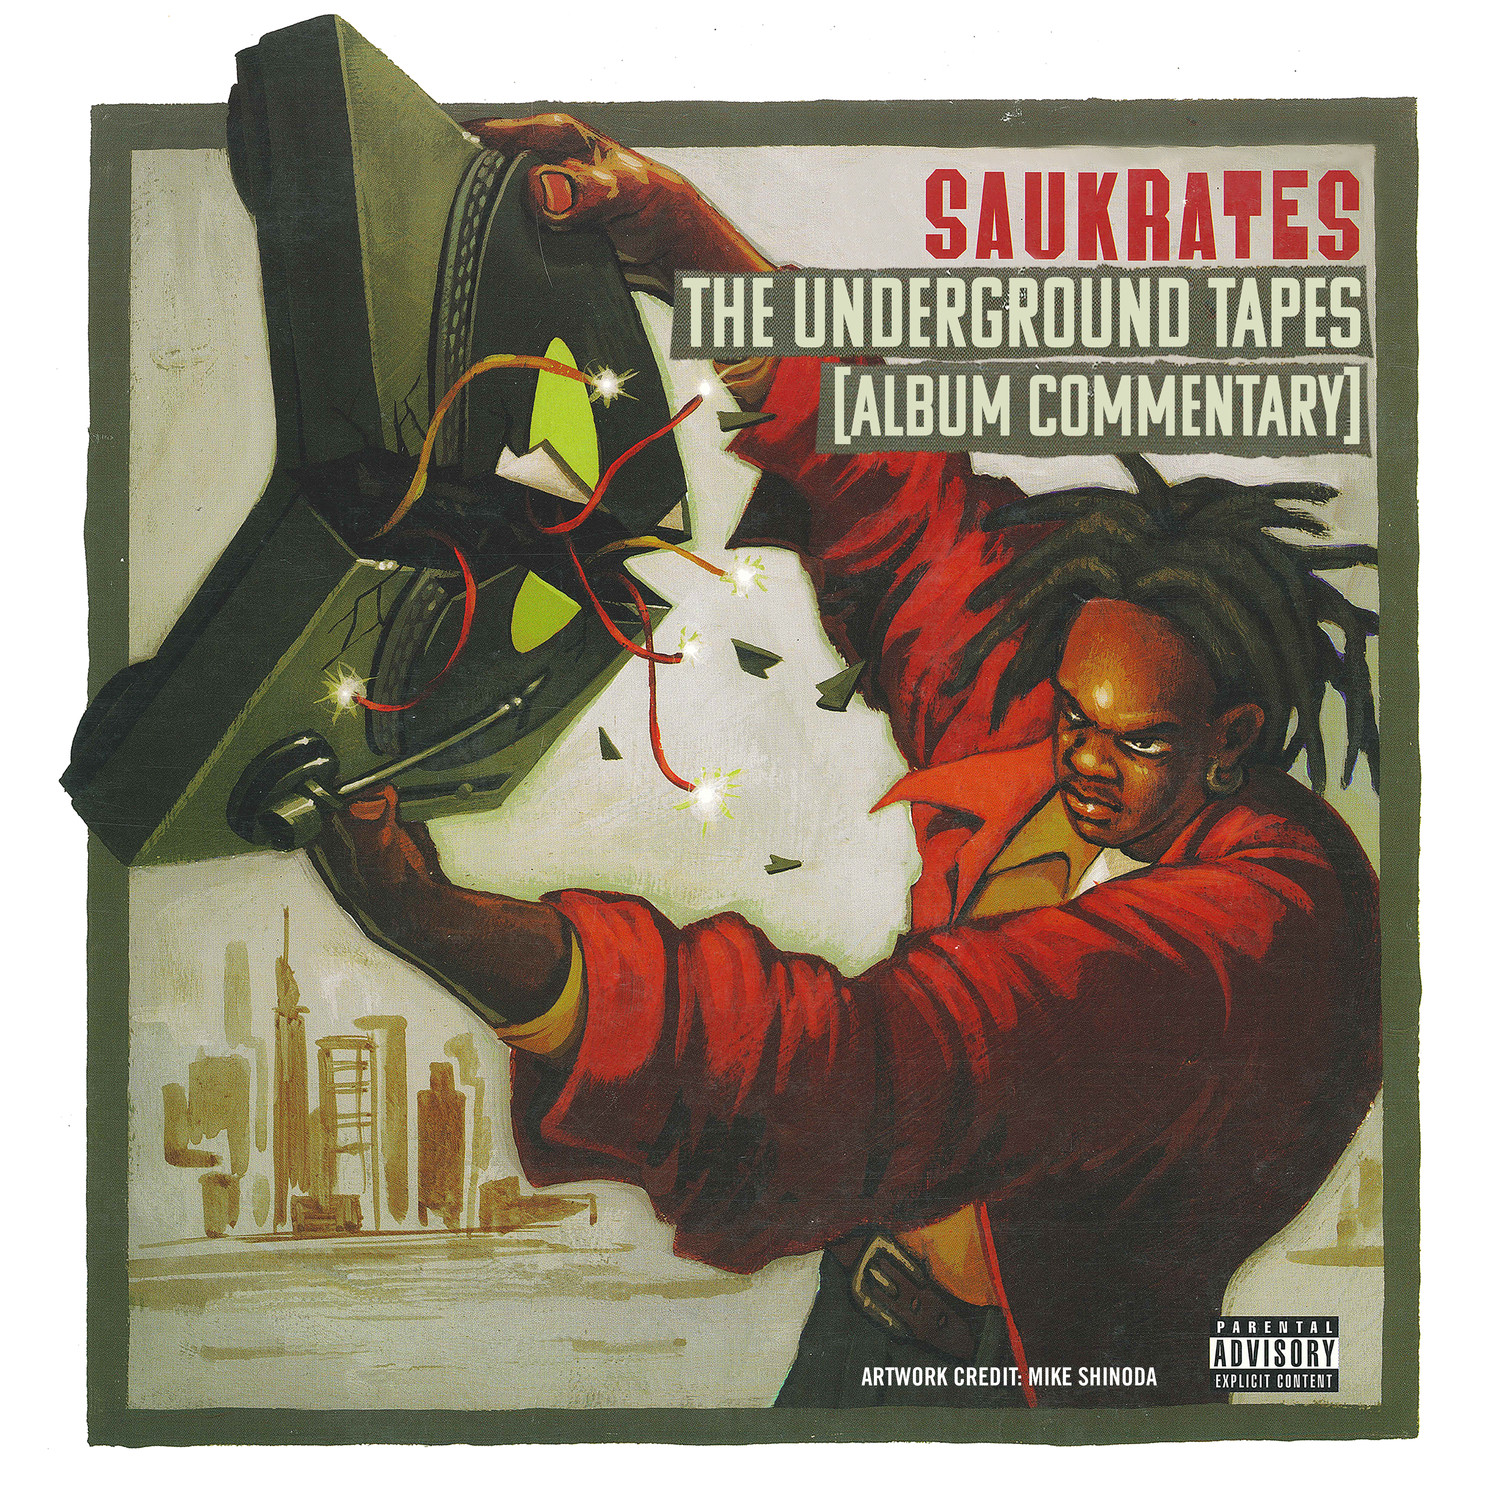 The Underground Tapes (Album Commentary)